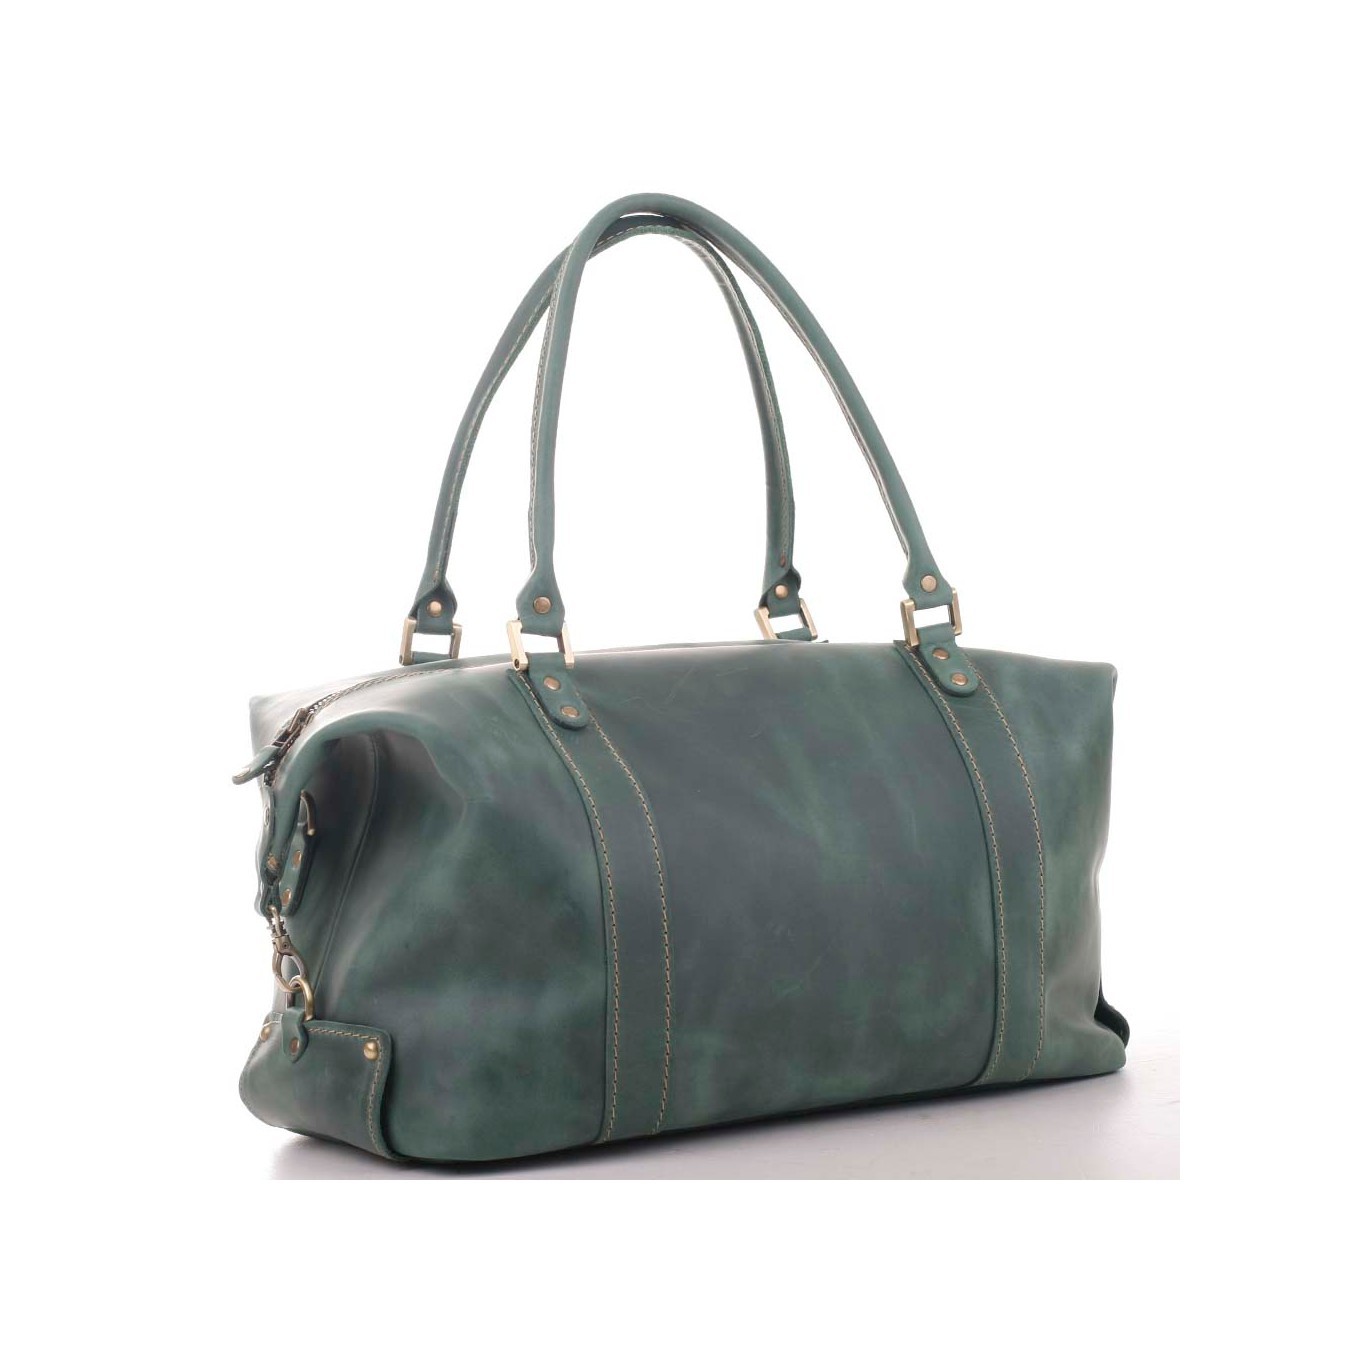 A beautiful and high-quality weekender bag of rich green color